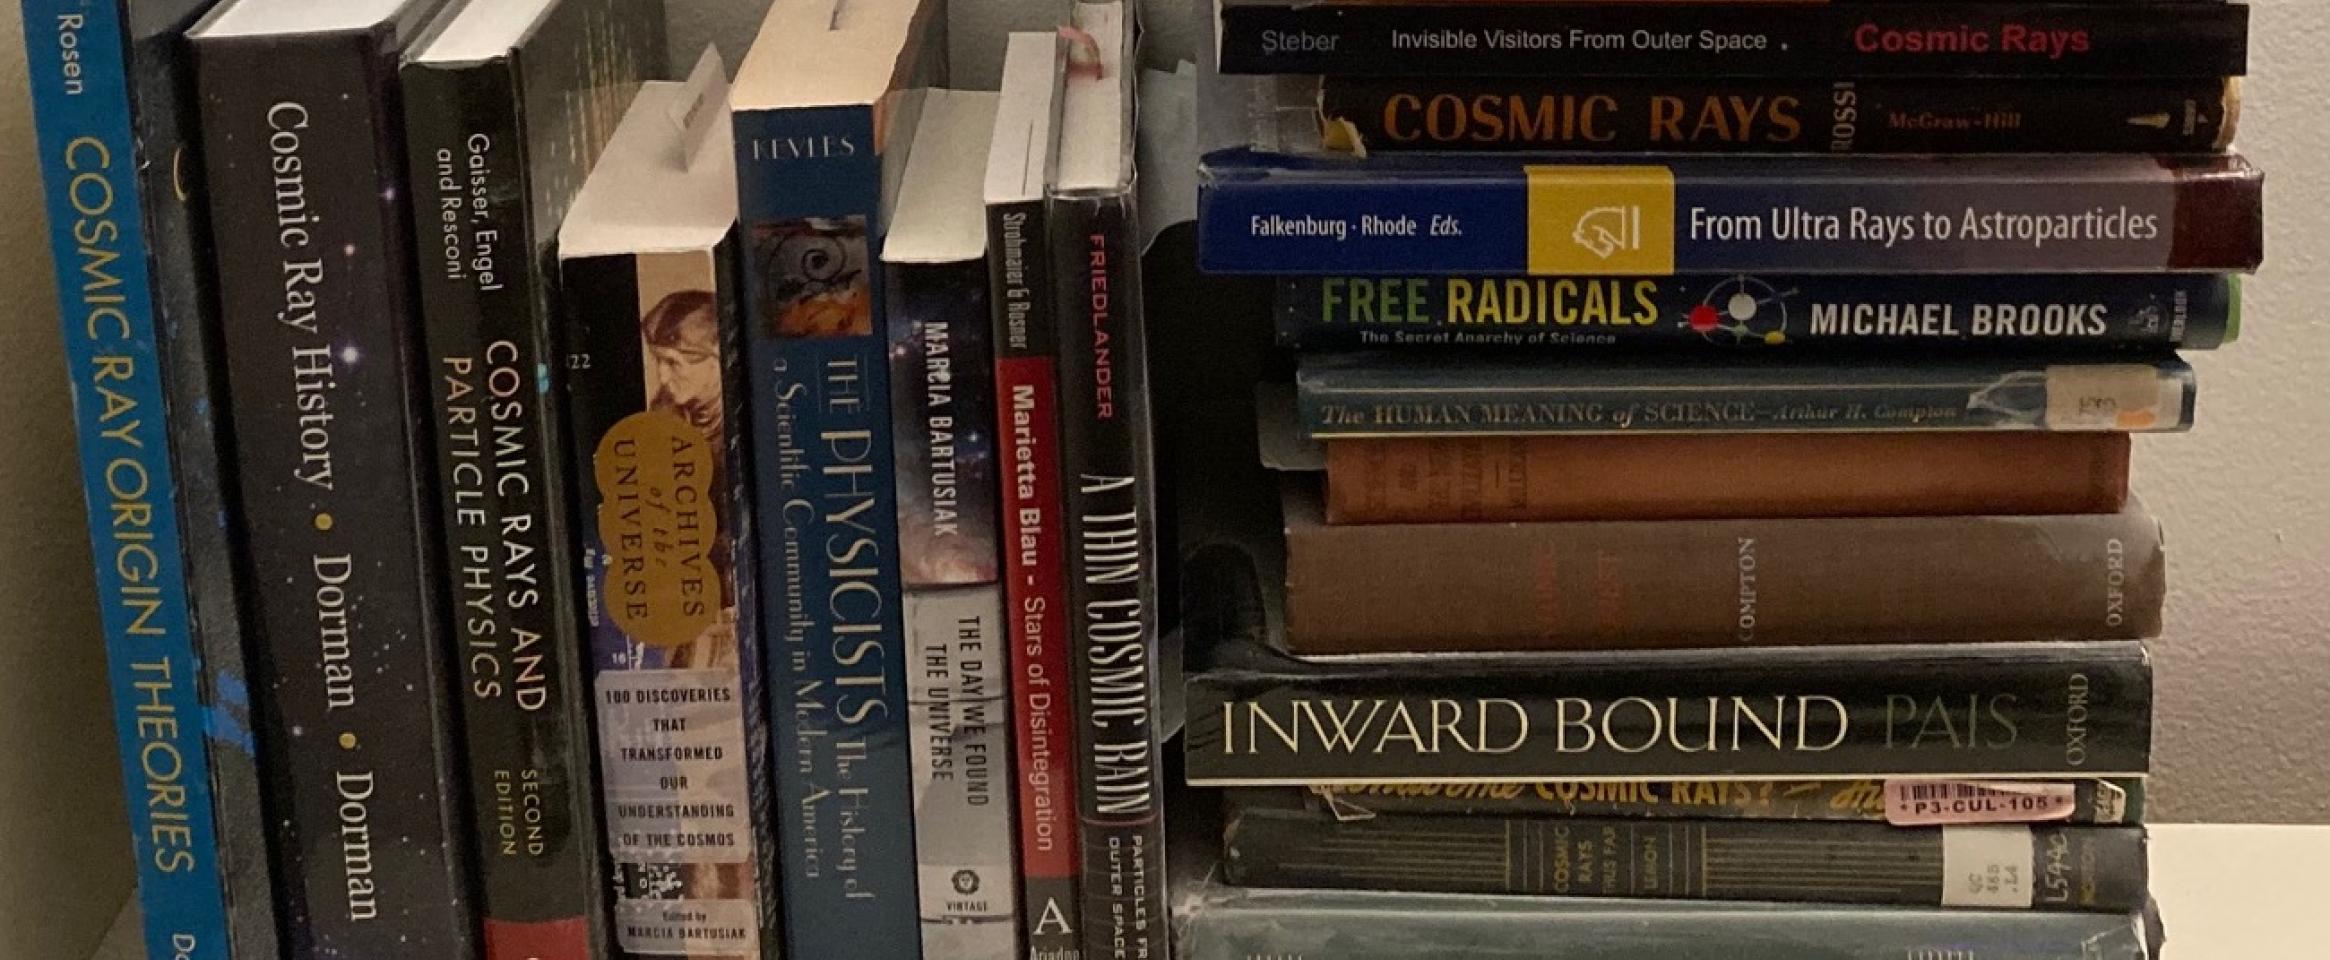 Rectangular photo of Mark Wolverton’s office bookshelf showing works by and about physicists Arthur Holly Compton and Robert Millikan, the subjects of his book Splinters of Infinity, along with books on cosmic rays, stars, astronomy, and physics. Photo credit: Mark Wolverton.